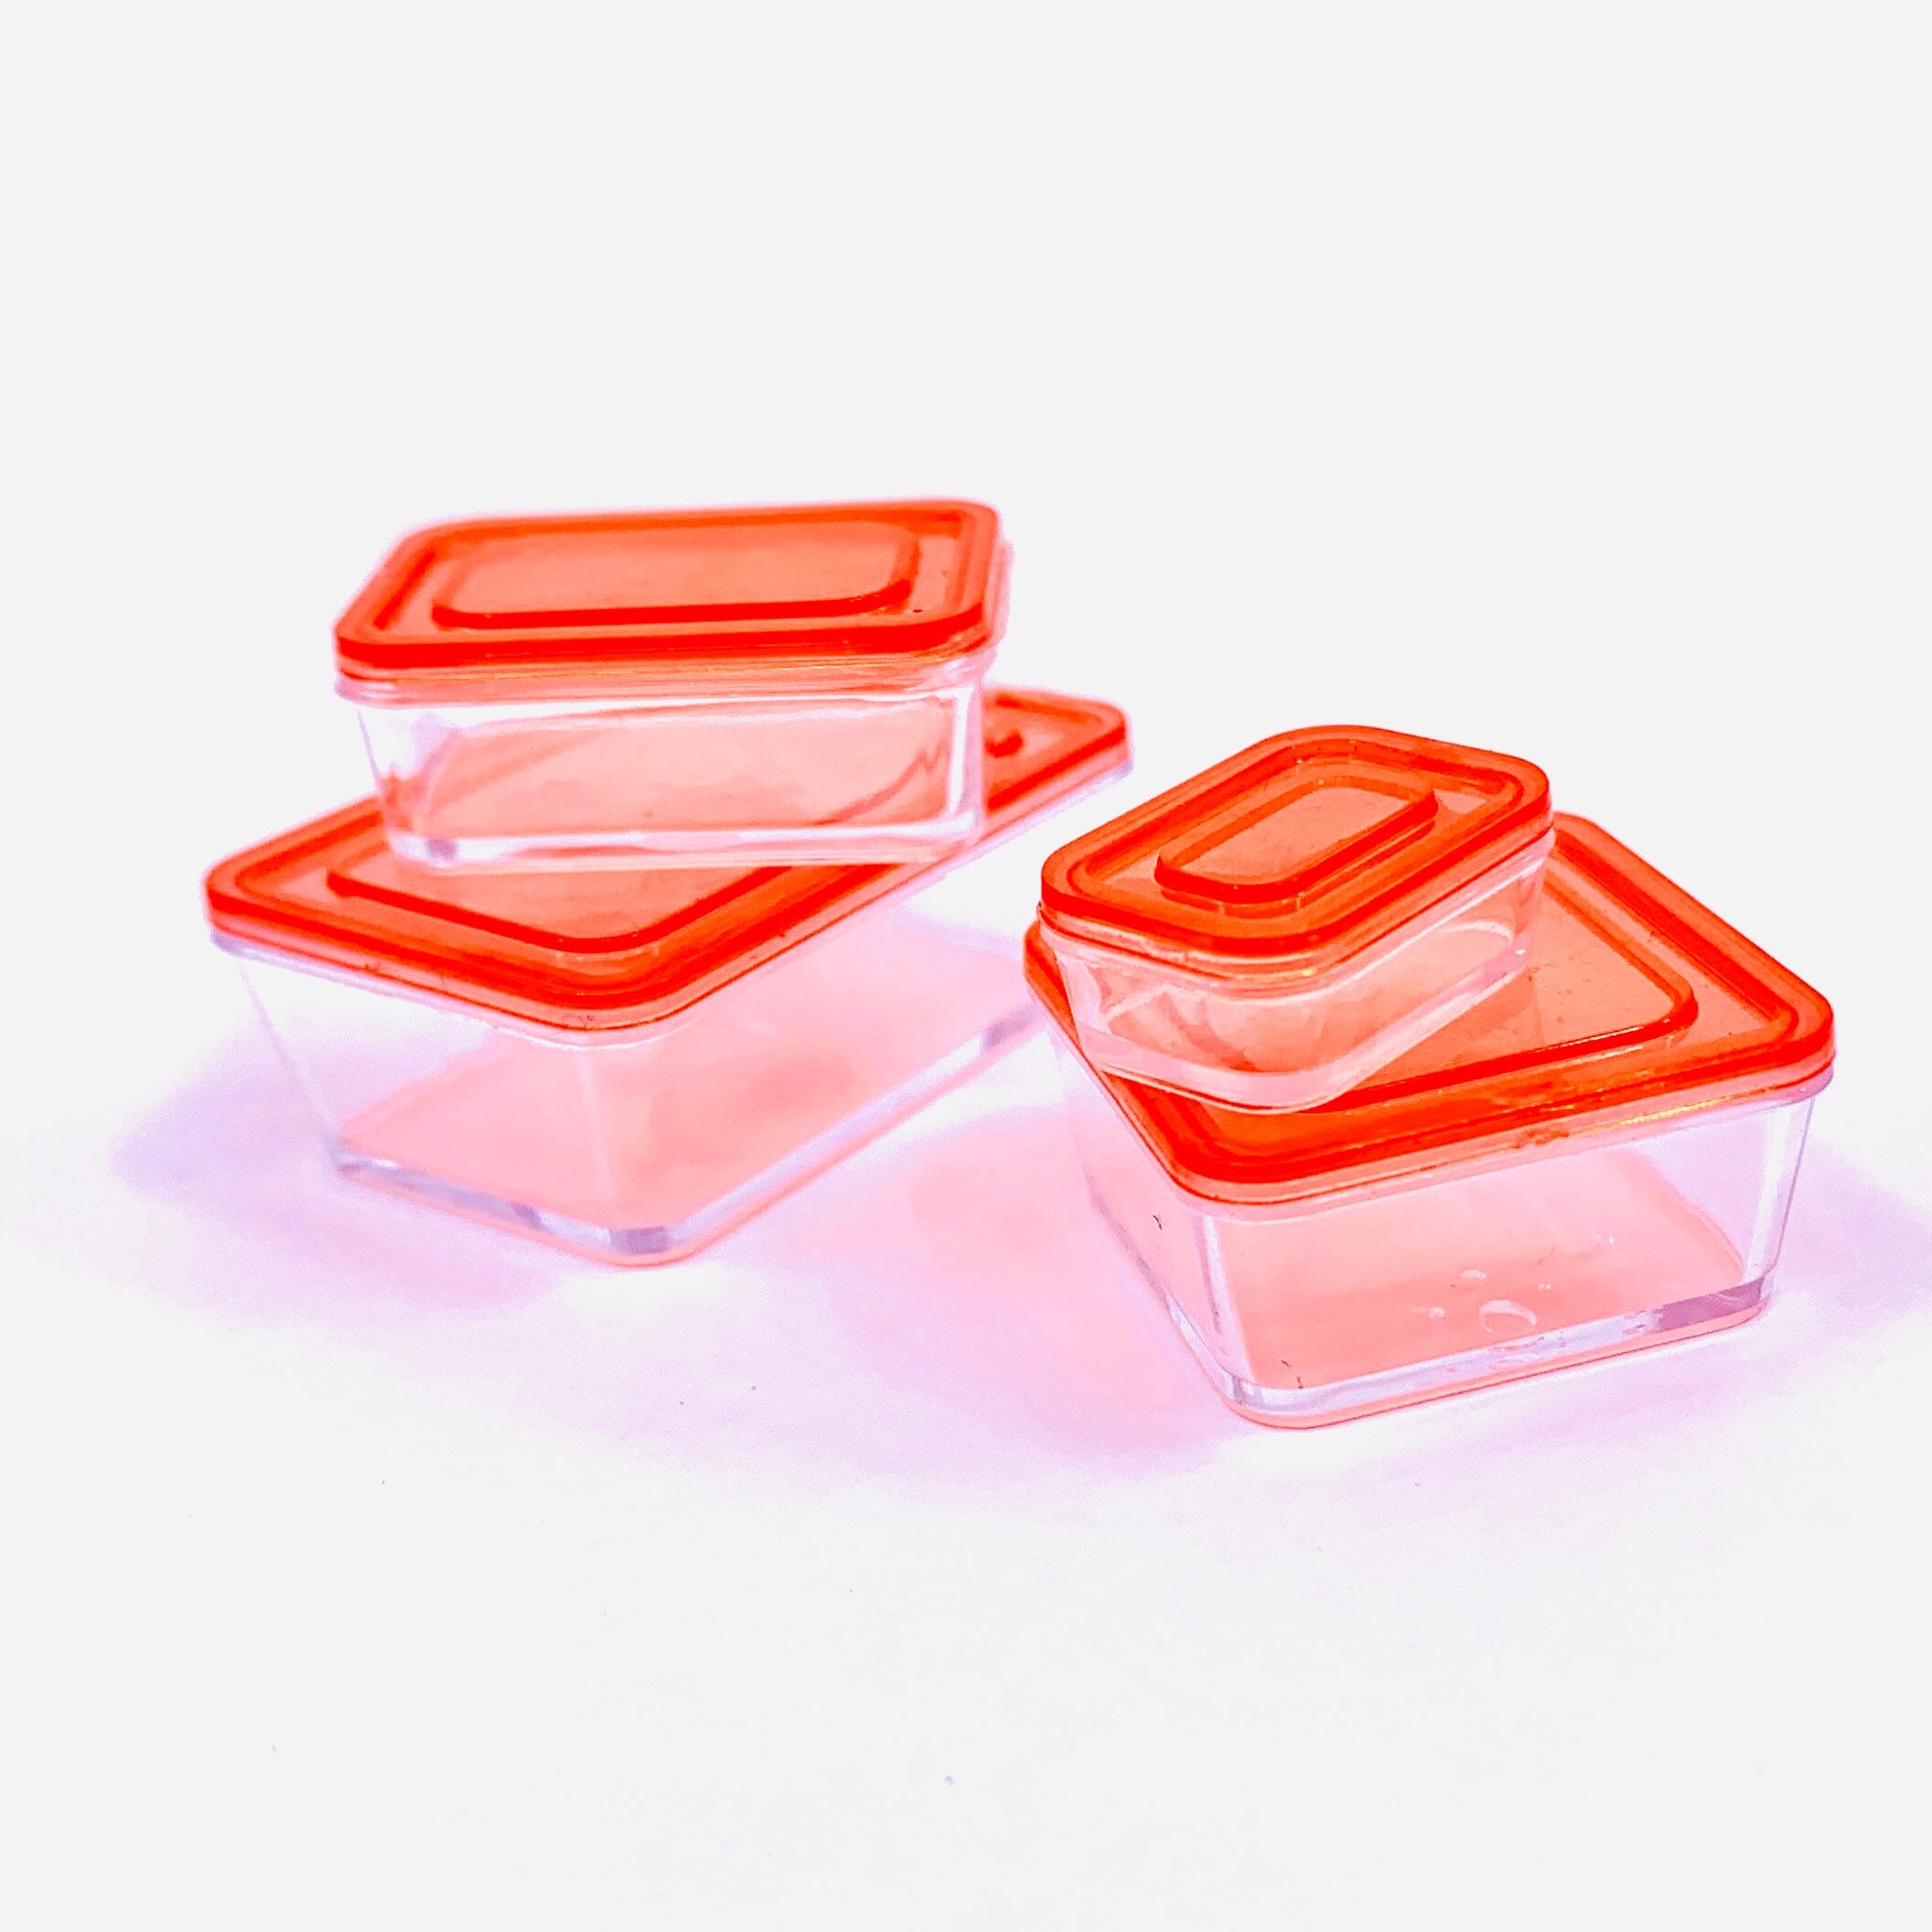 Kiwi Tupperware - Too cute and great storage for you or your mini